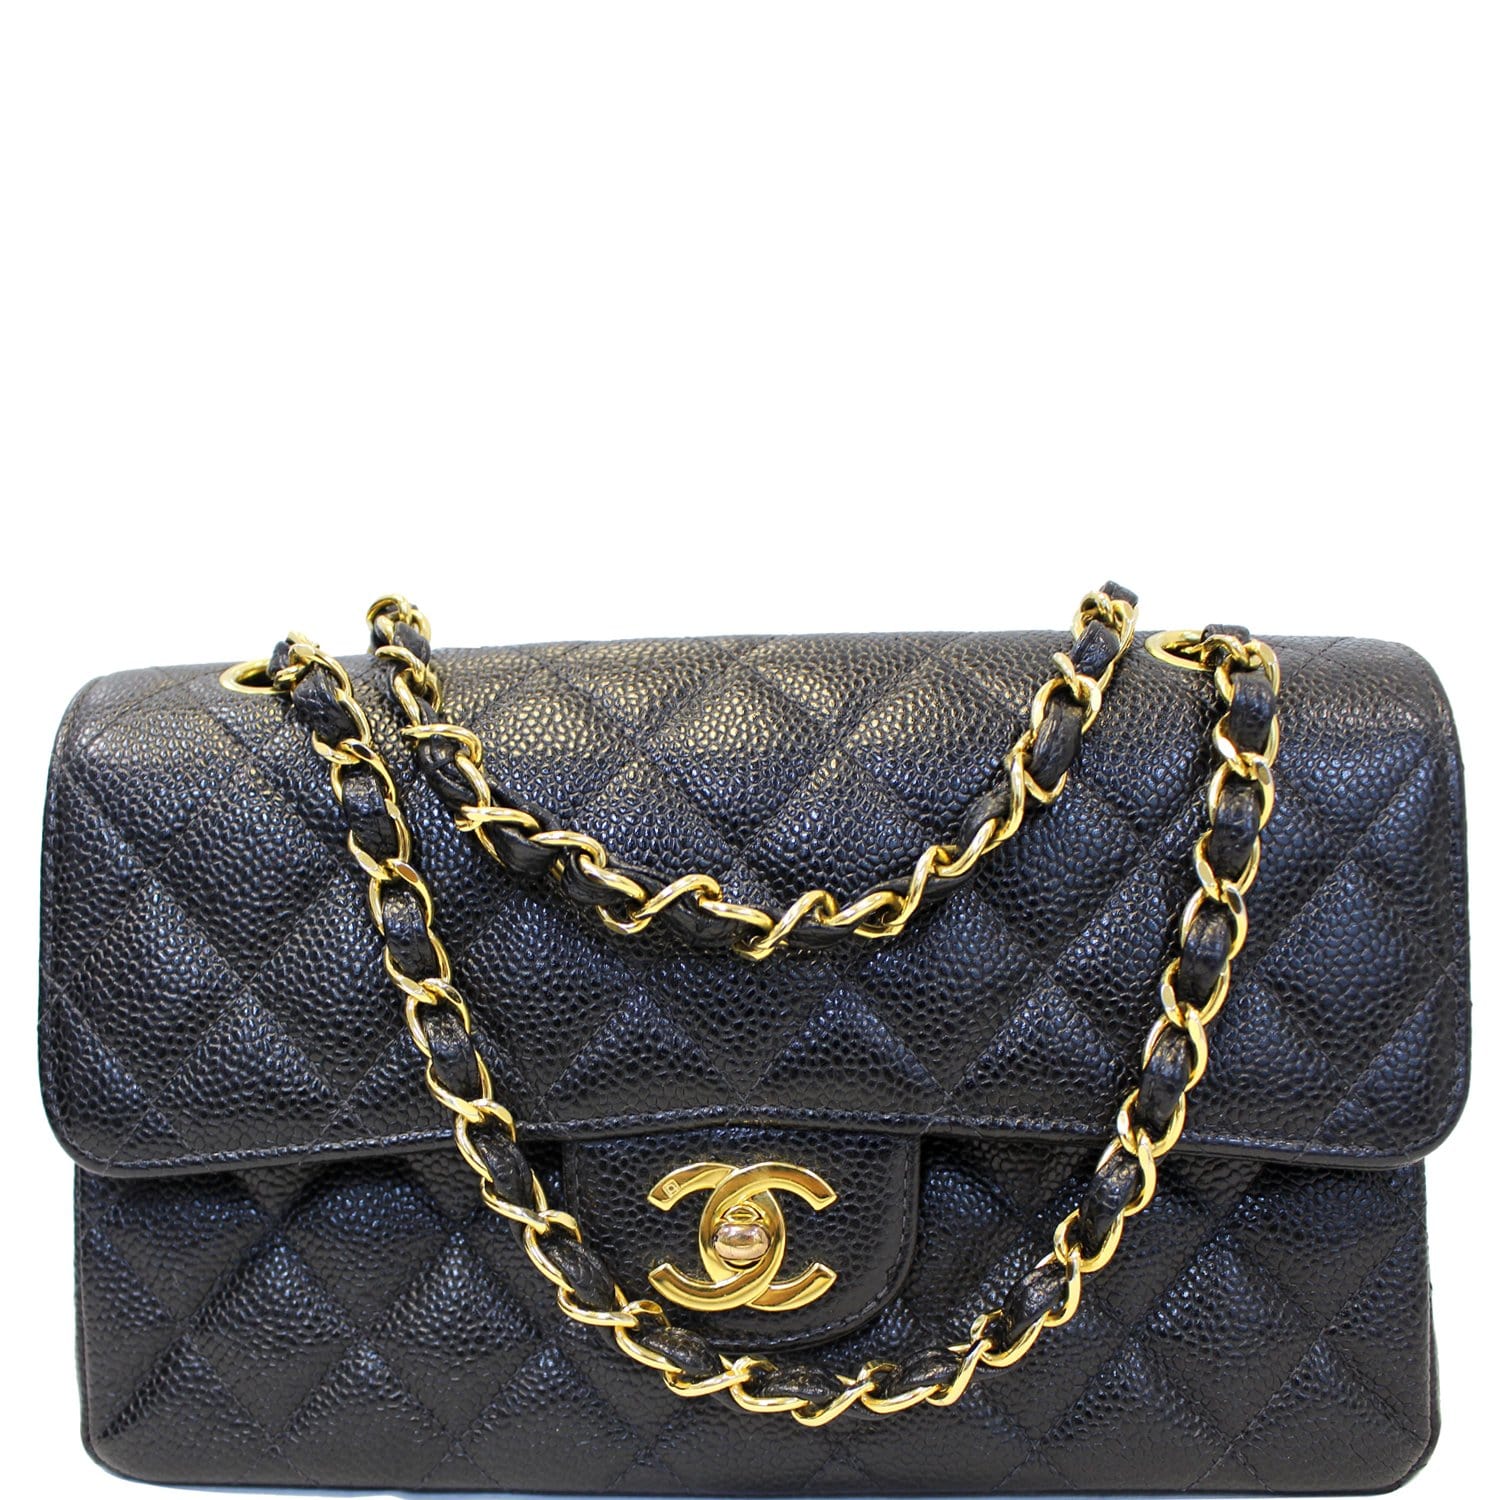 CHANEL, Bags, Copy Chanel Caviar Classic Small Double Flap